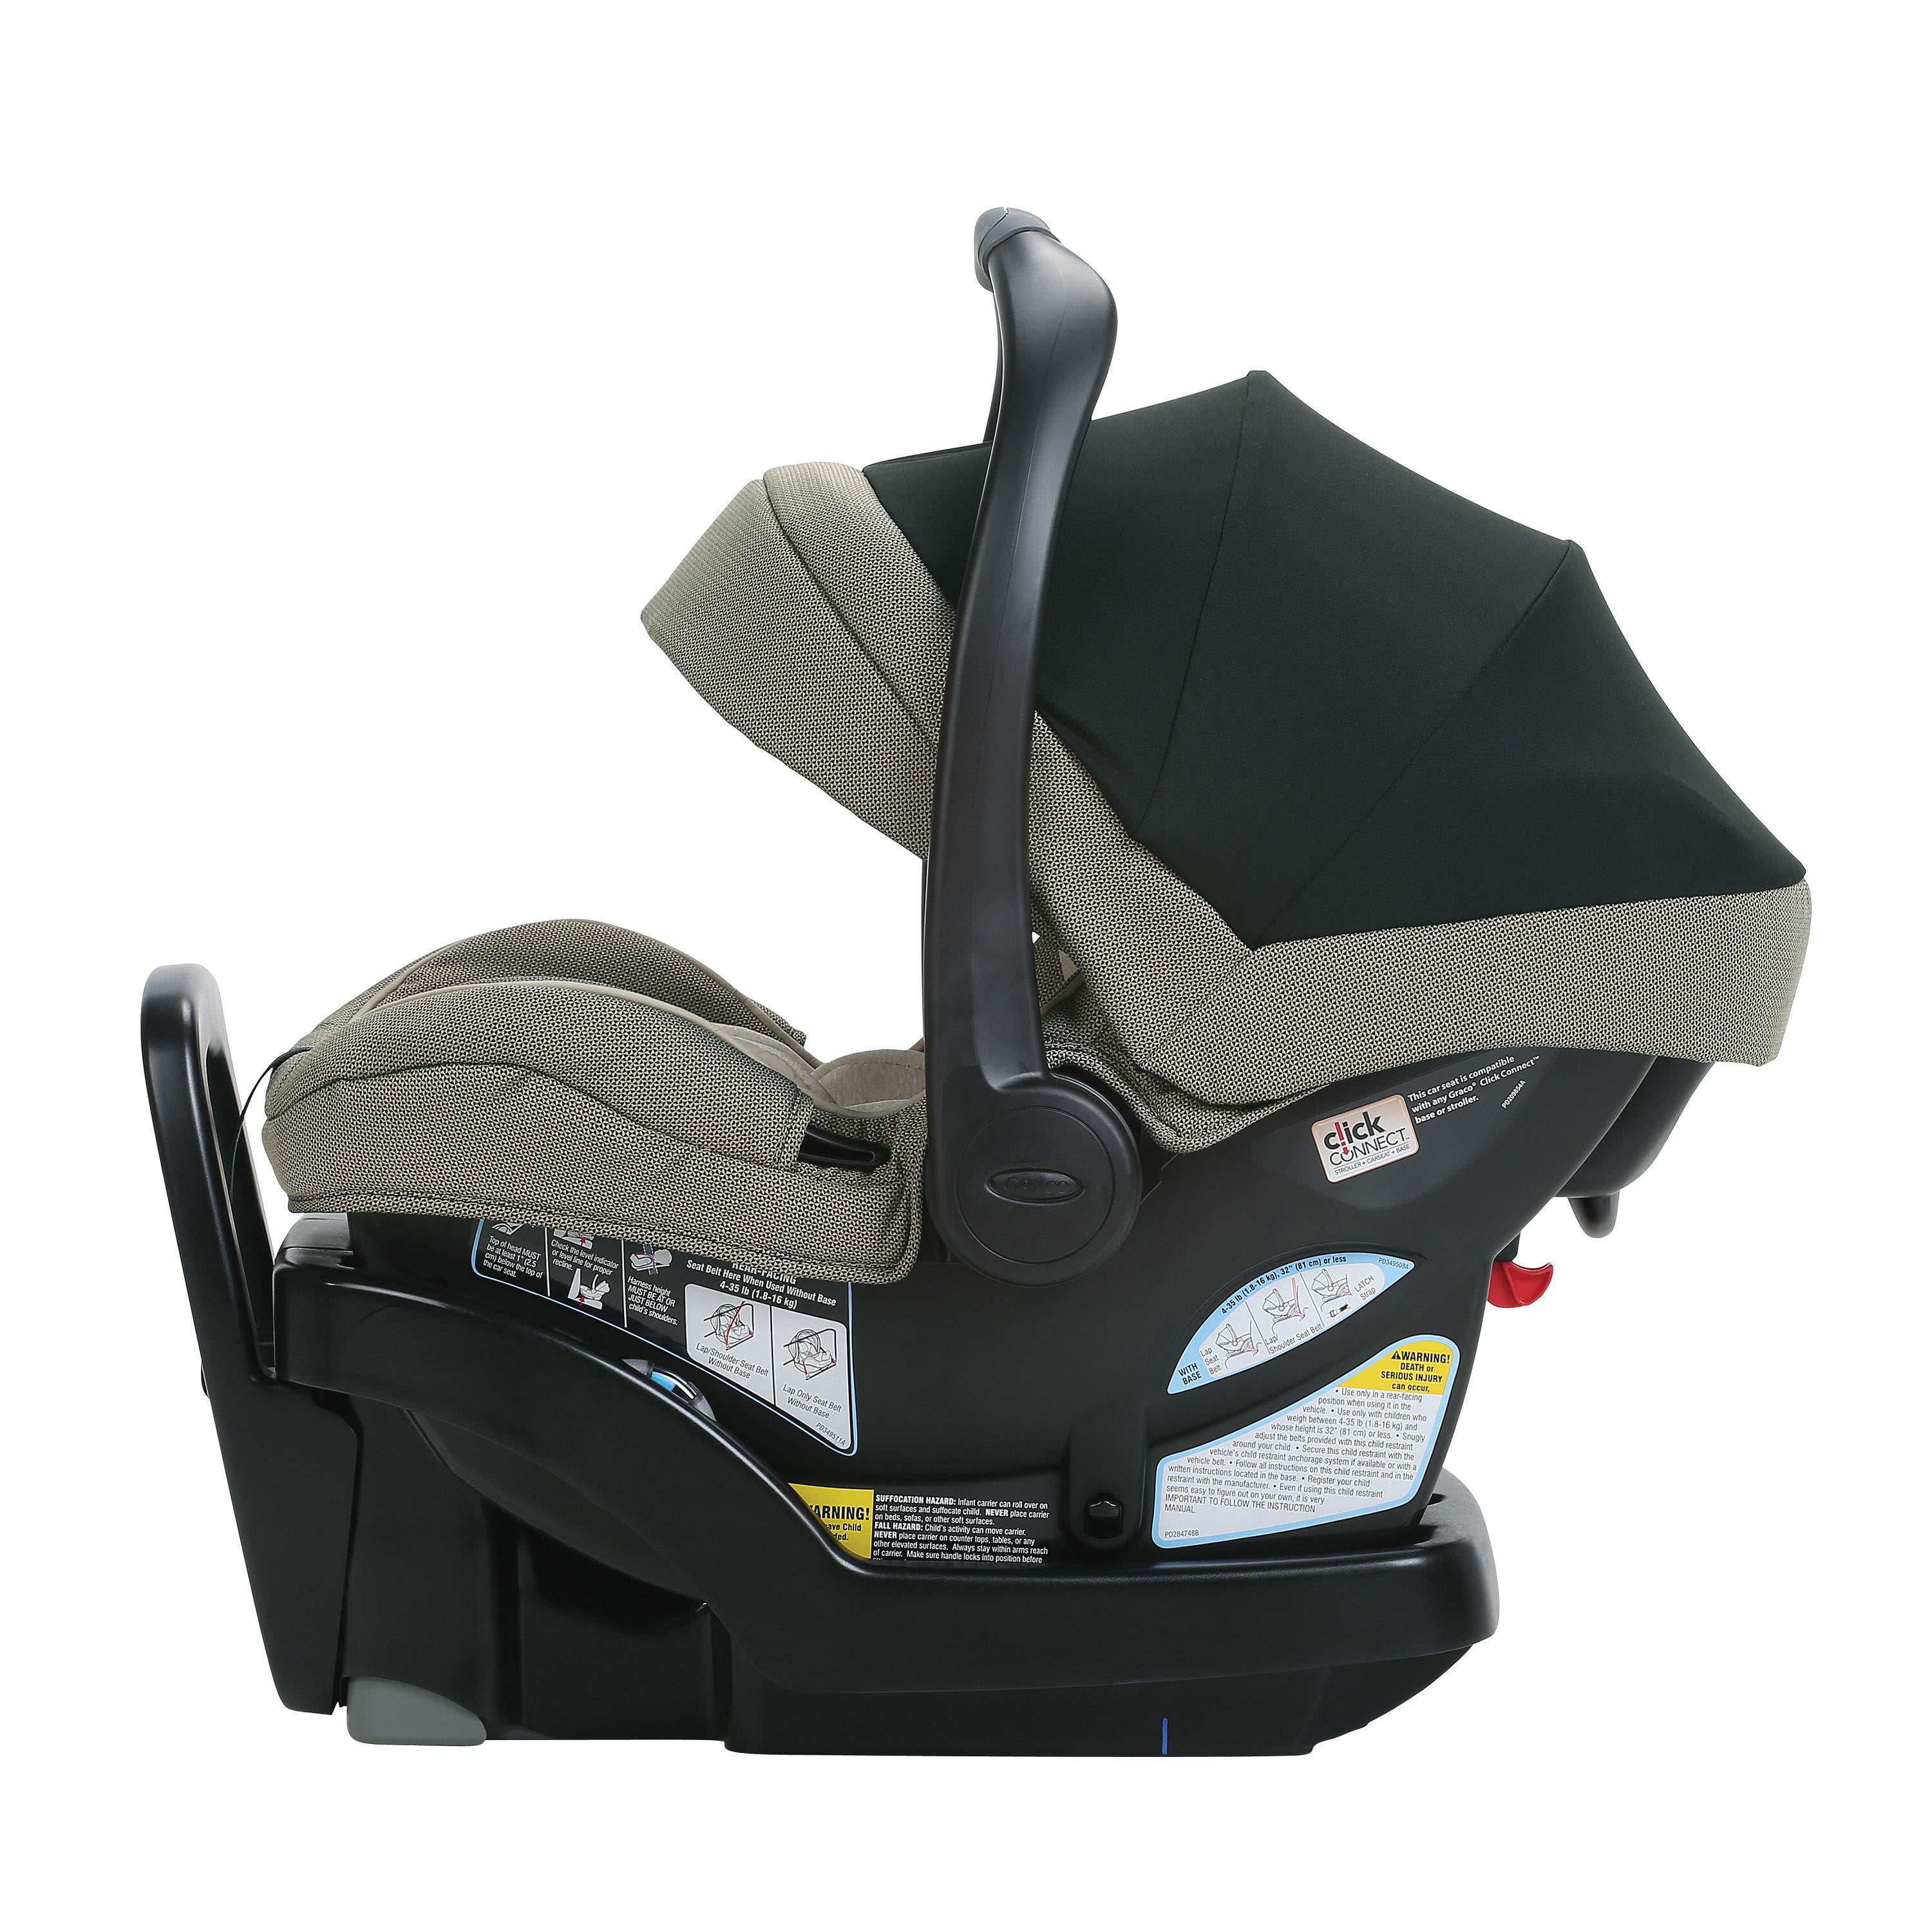 graco extend2fit compatible stroller